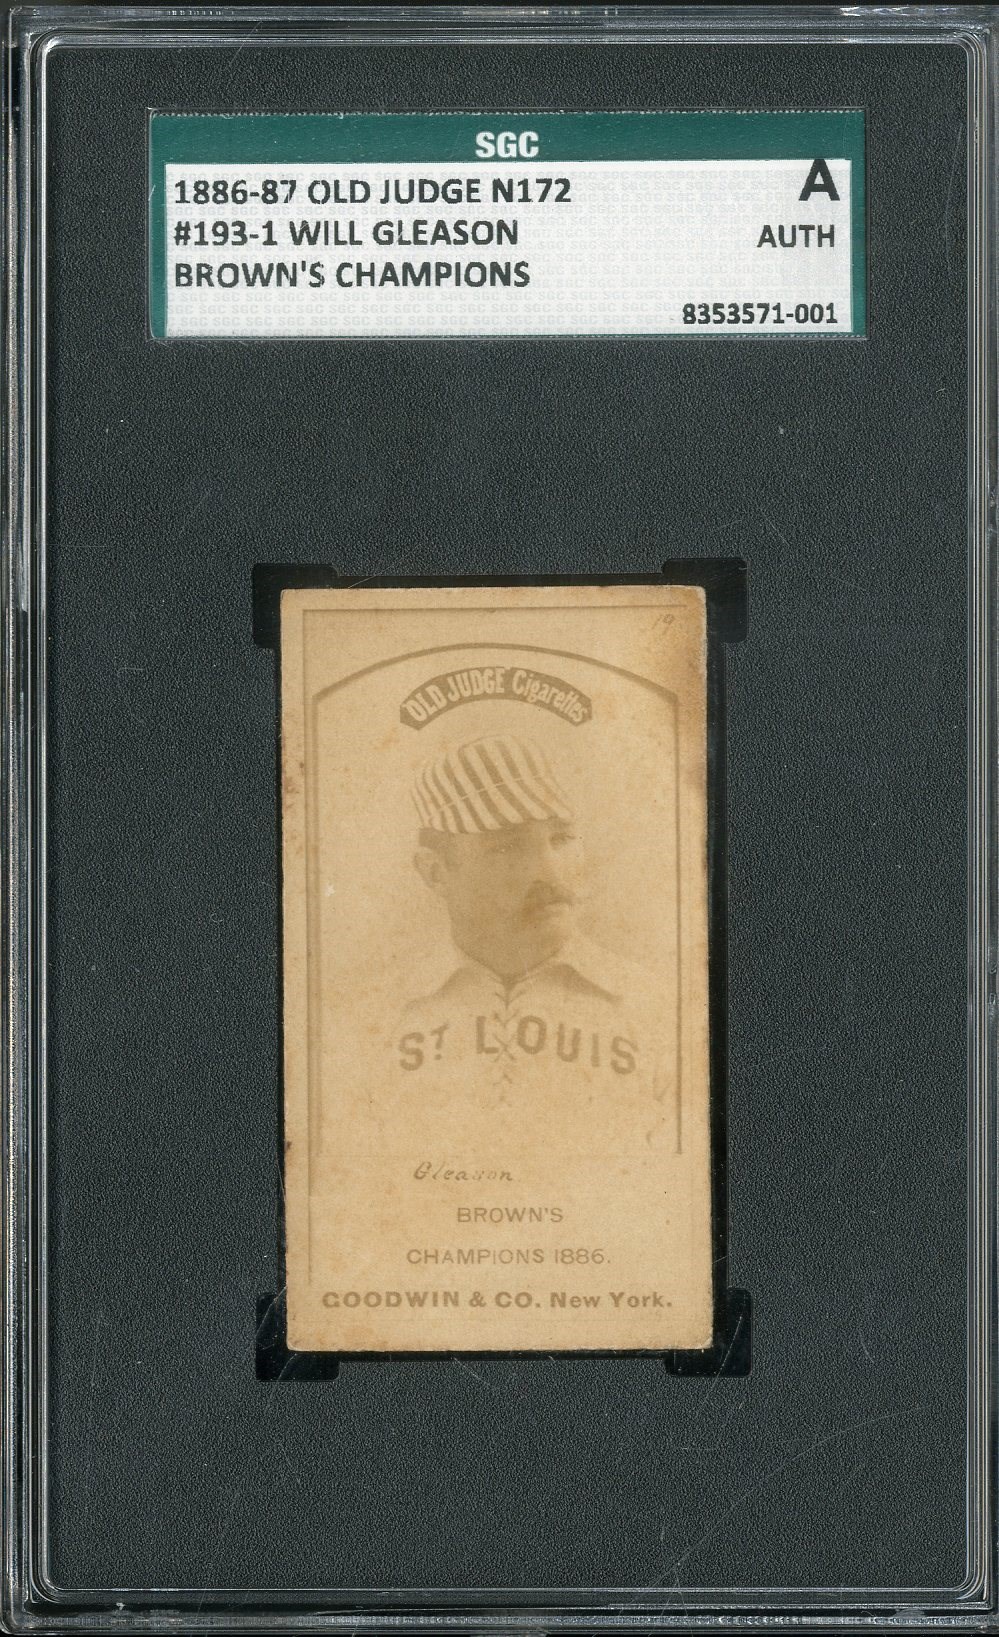 Baseball and Trading Cards - 1887 N172 Old Judge Kid Gleason (SGC Authentic)